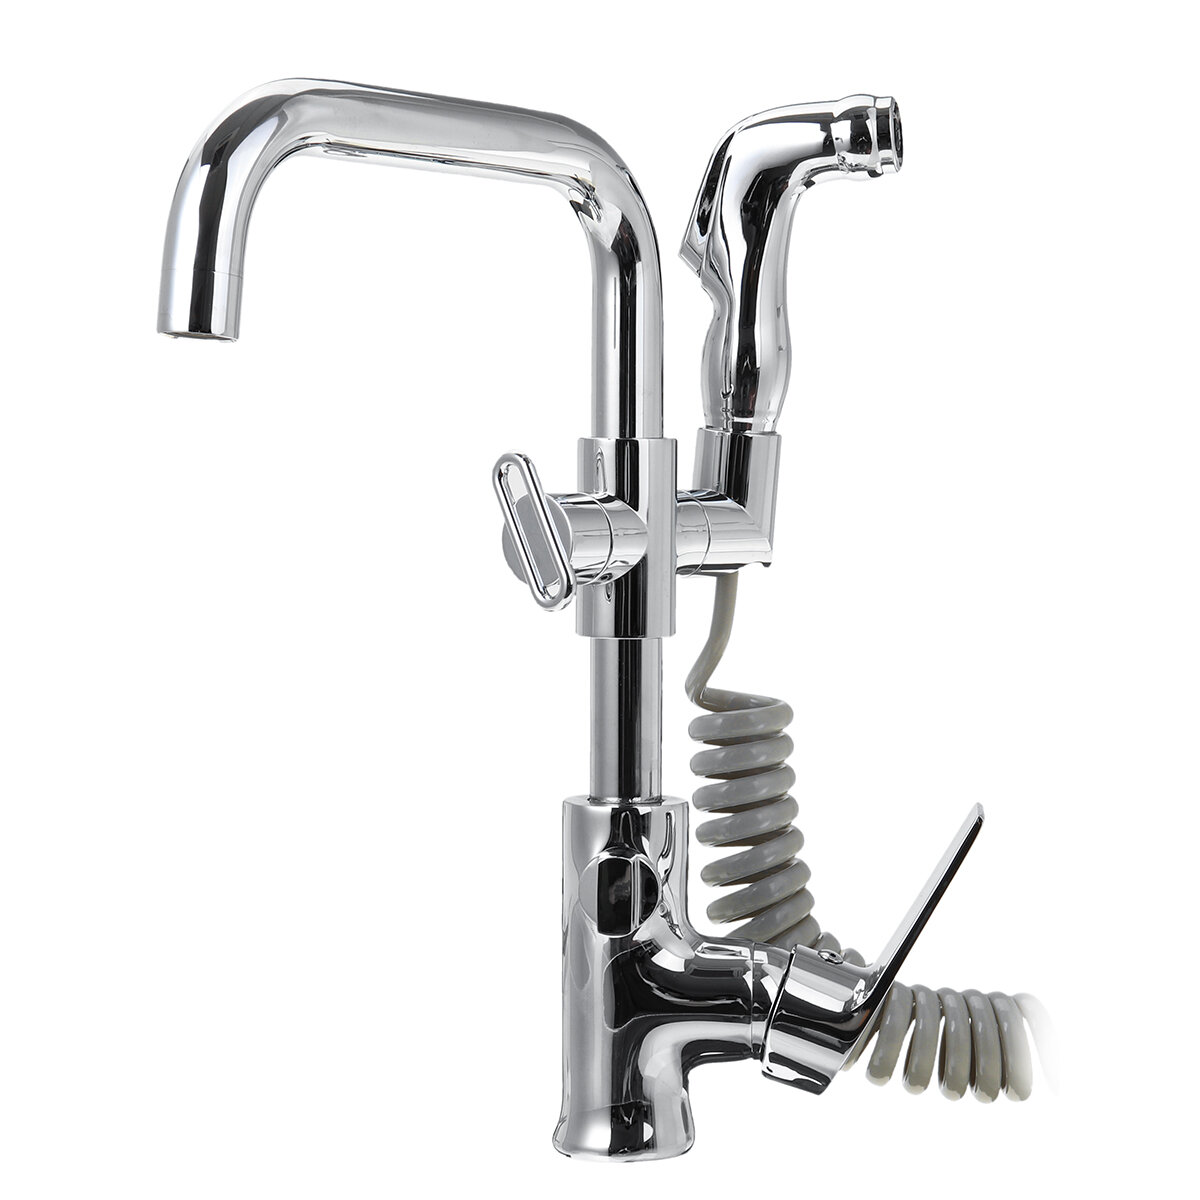 Image of Chrome Kitchen Faucet Dual Sprayer Swivel Spout Spring Pull Out Spray Mixer Tap